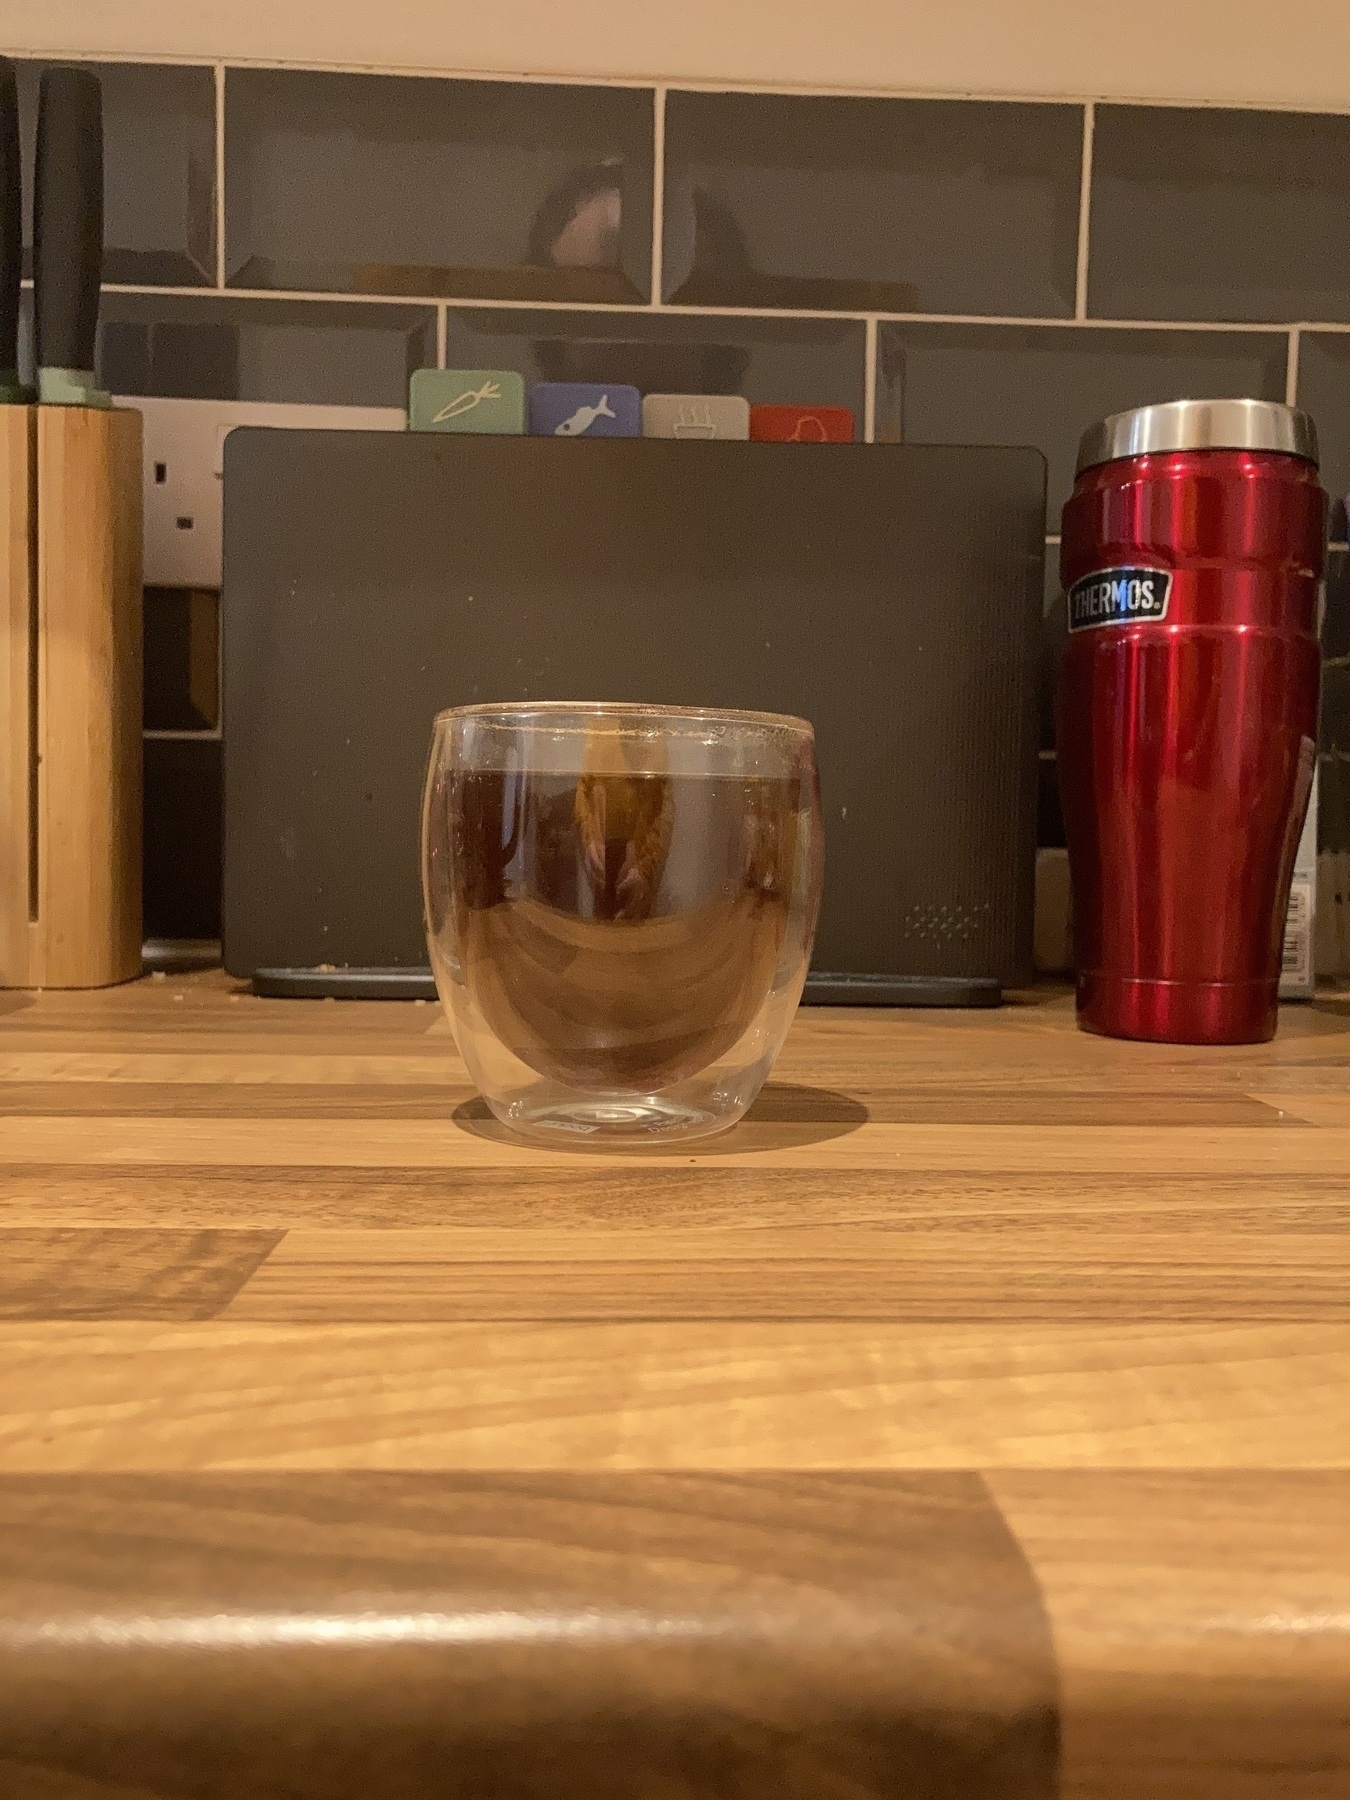 A glass cup of coffee atop a kitchen counter, with chopping boards, a metal thermal container, and a knife block in the background.